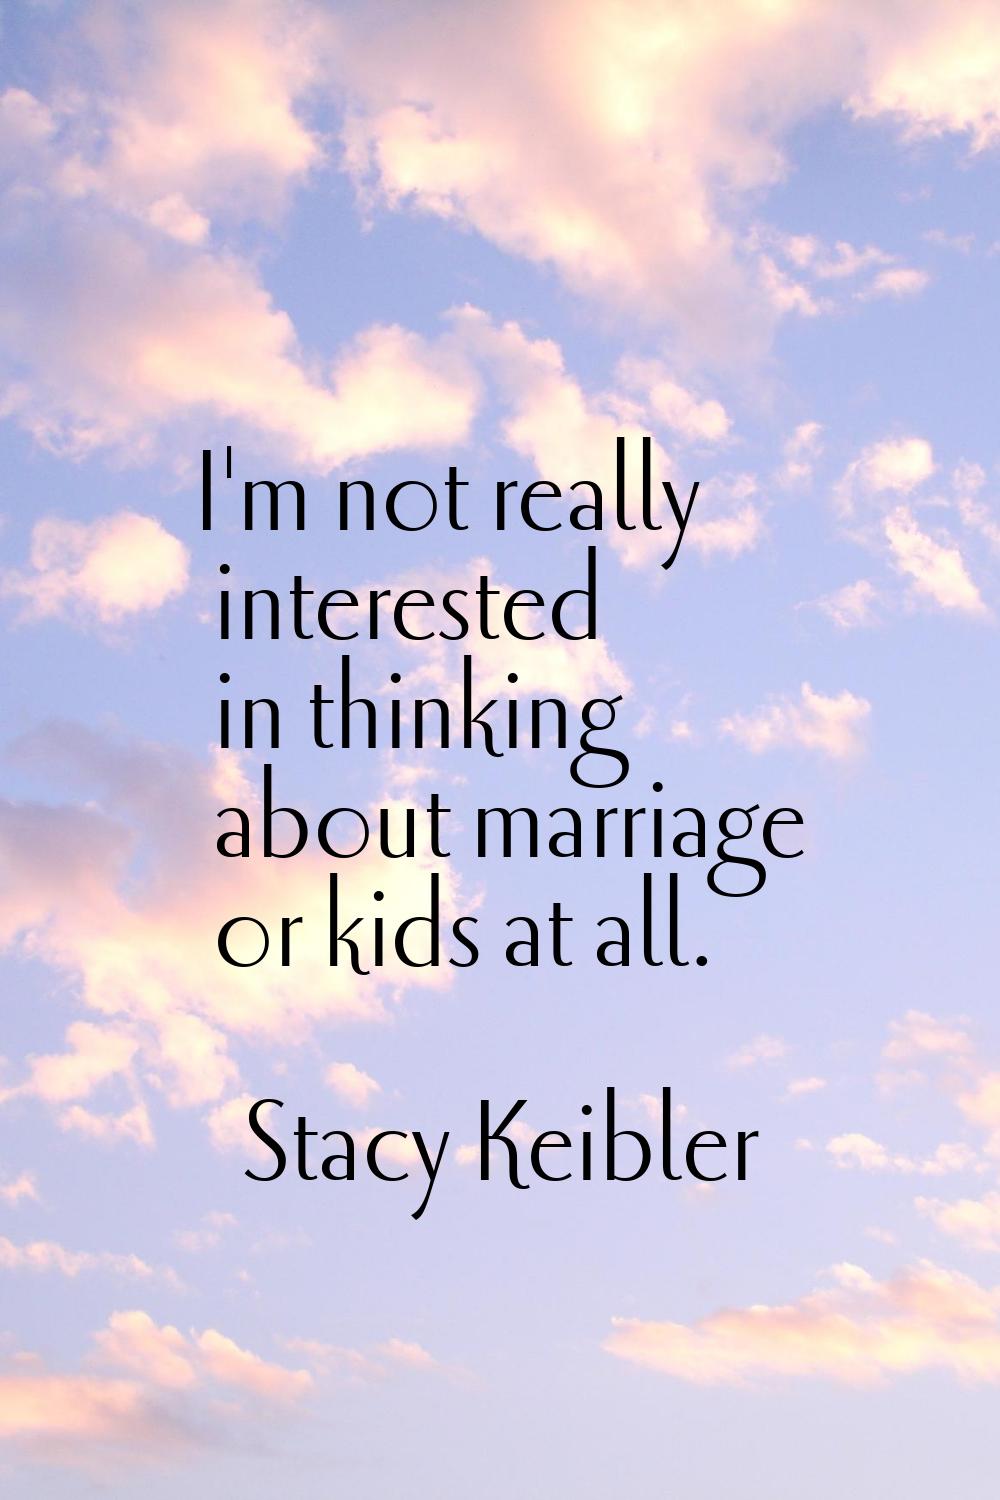 I'm not really interested in thinking about marriage or kids at all.